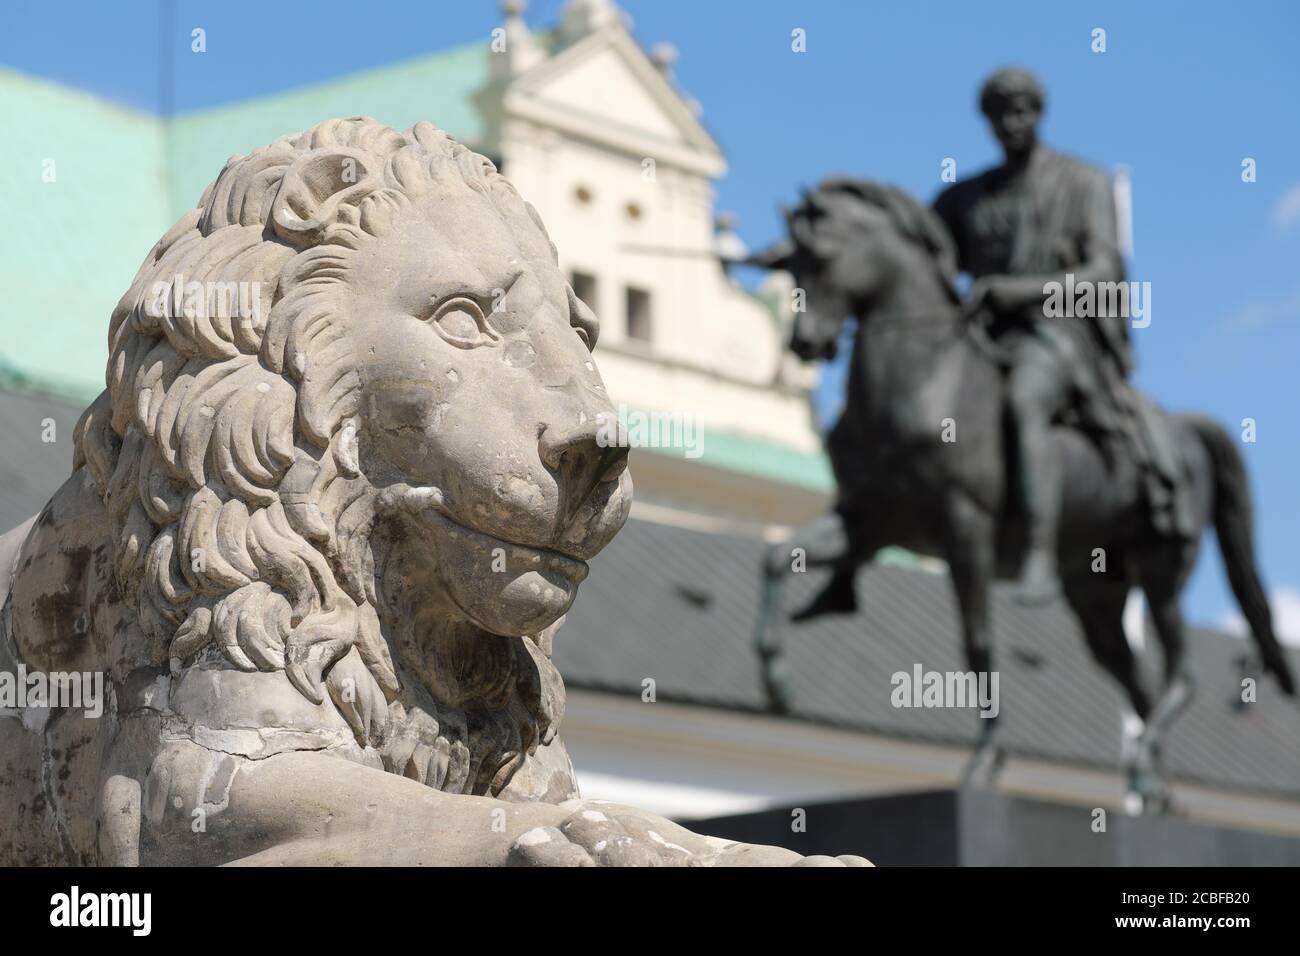 Warsaw Poland The Presidential Palace with lion sculpture and statue of Prince Józef Poniatowski Stock Photo